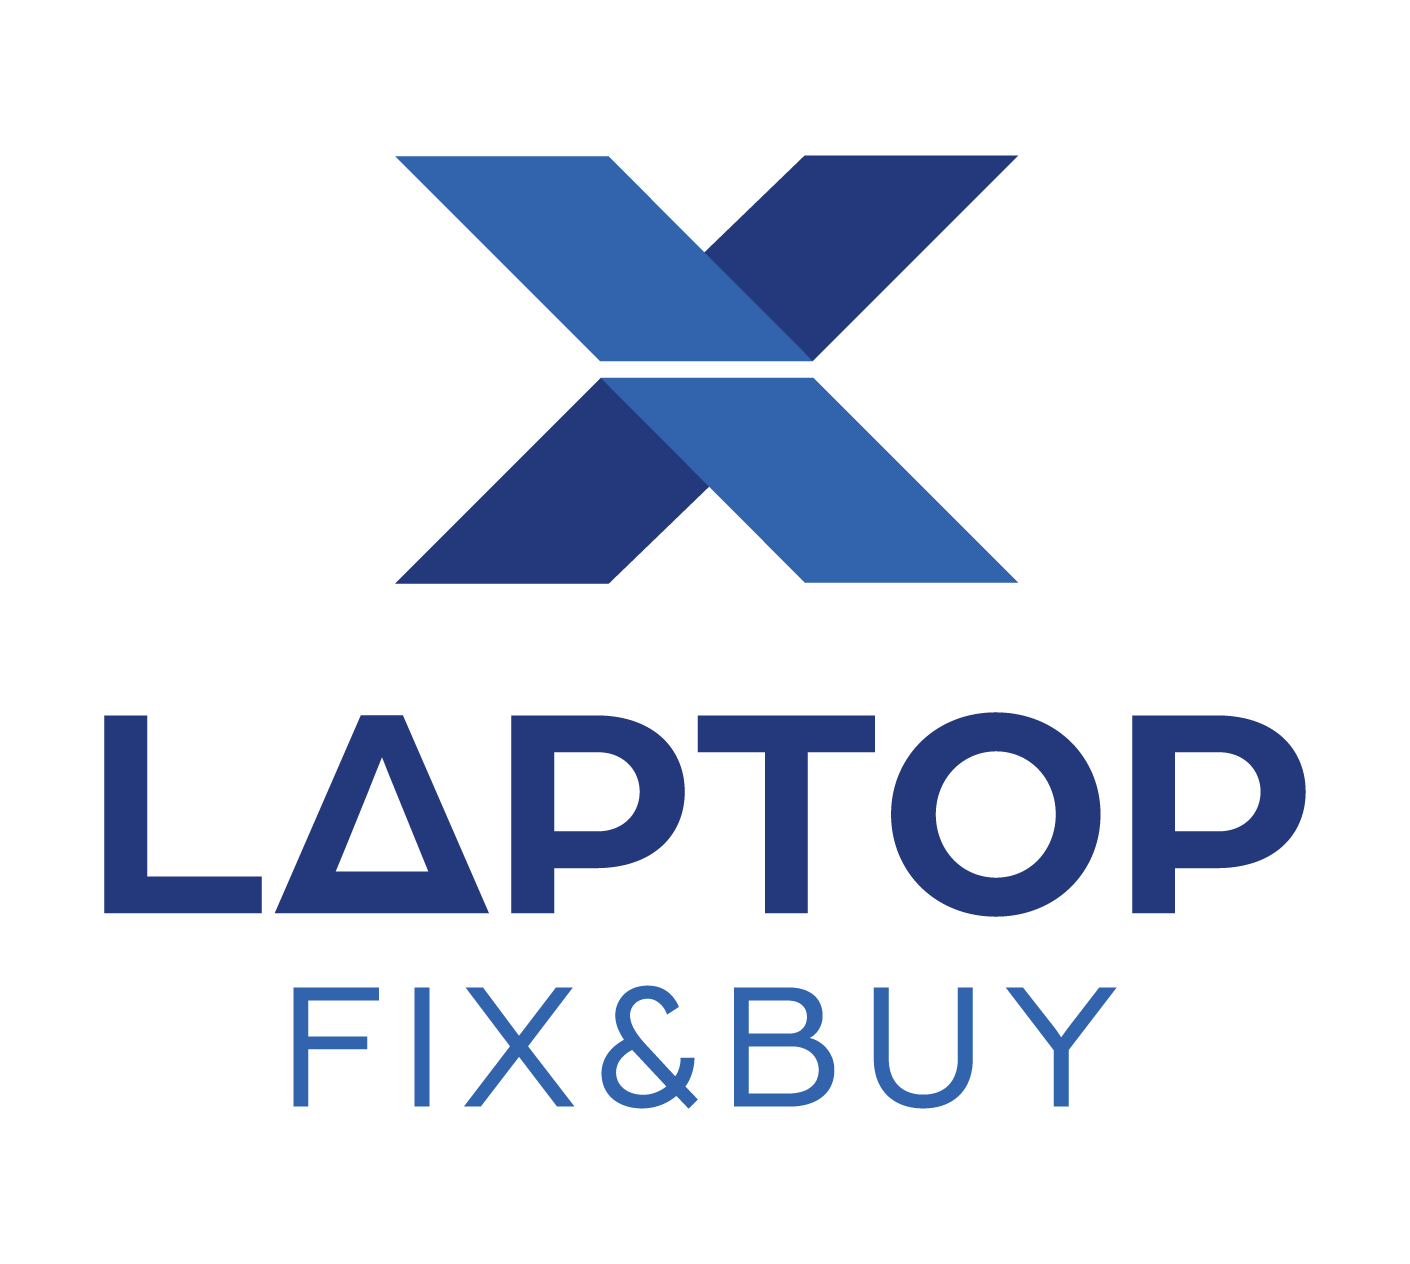 Laptop Fix and Buy